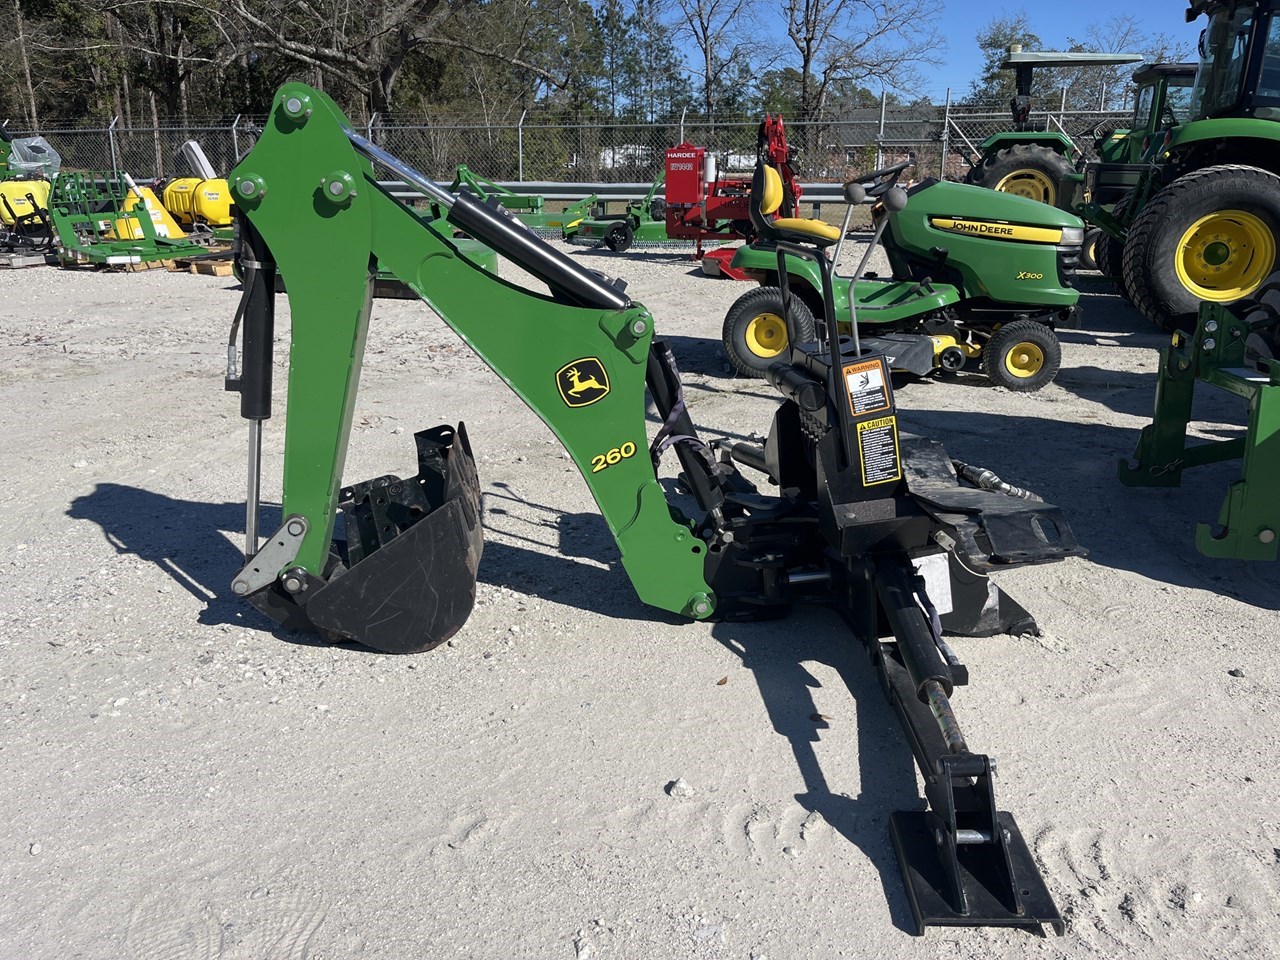 2016 John Deere 260 Misc. Grounds Care For Sale